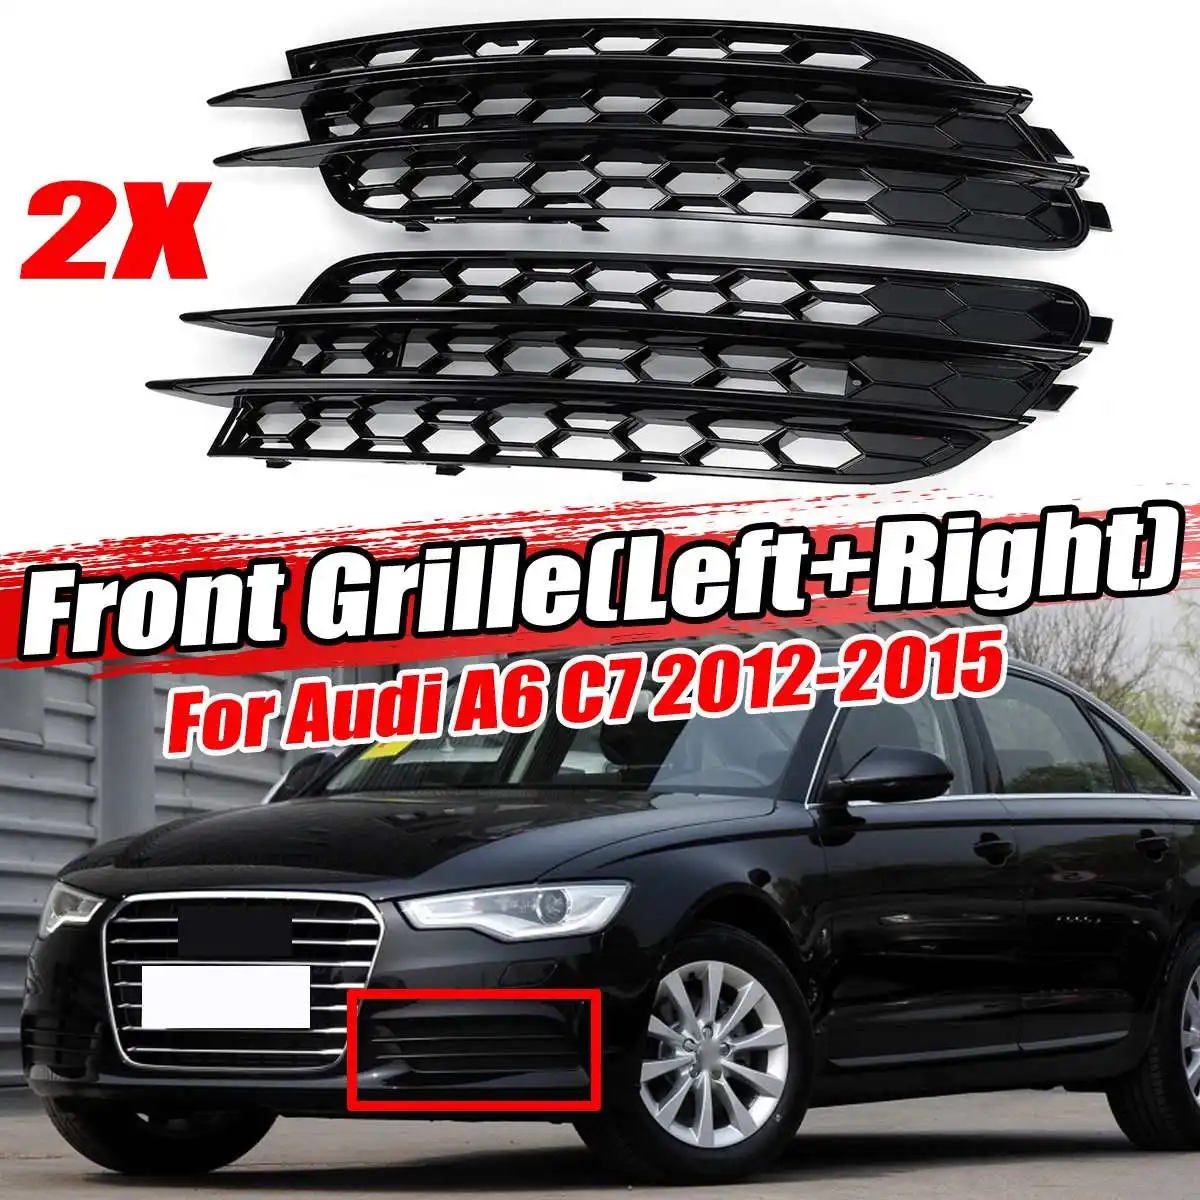 

Chrome/Black RS6 Style ABS 2x Car Front Fog Light Grille Cover Trim For Audi A6 C7 Sedan 2012 2013 2014 2015 Fog Lamp Grill